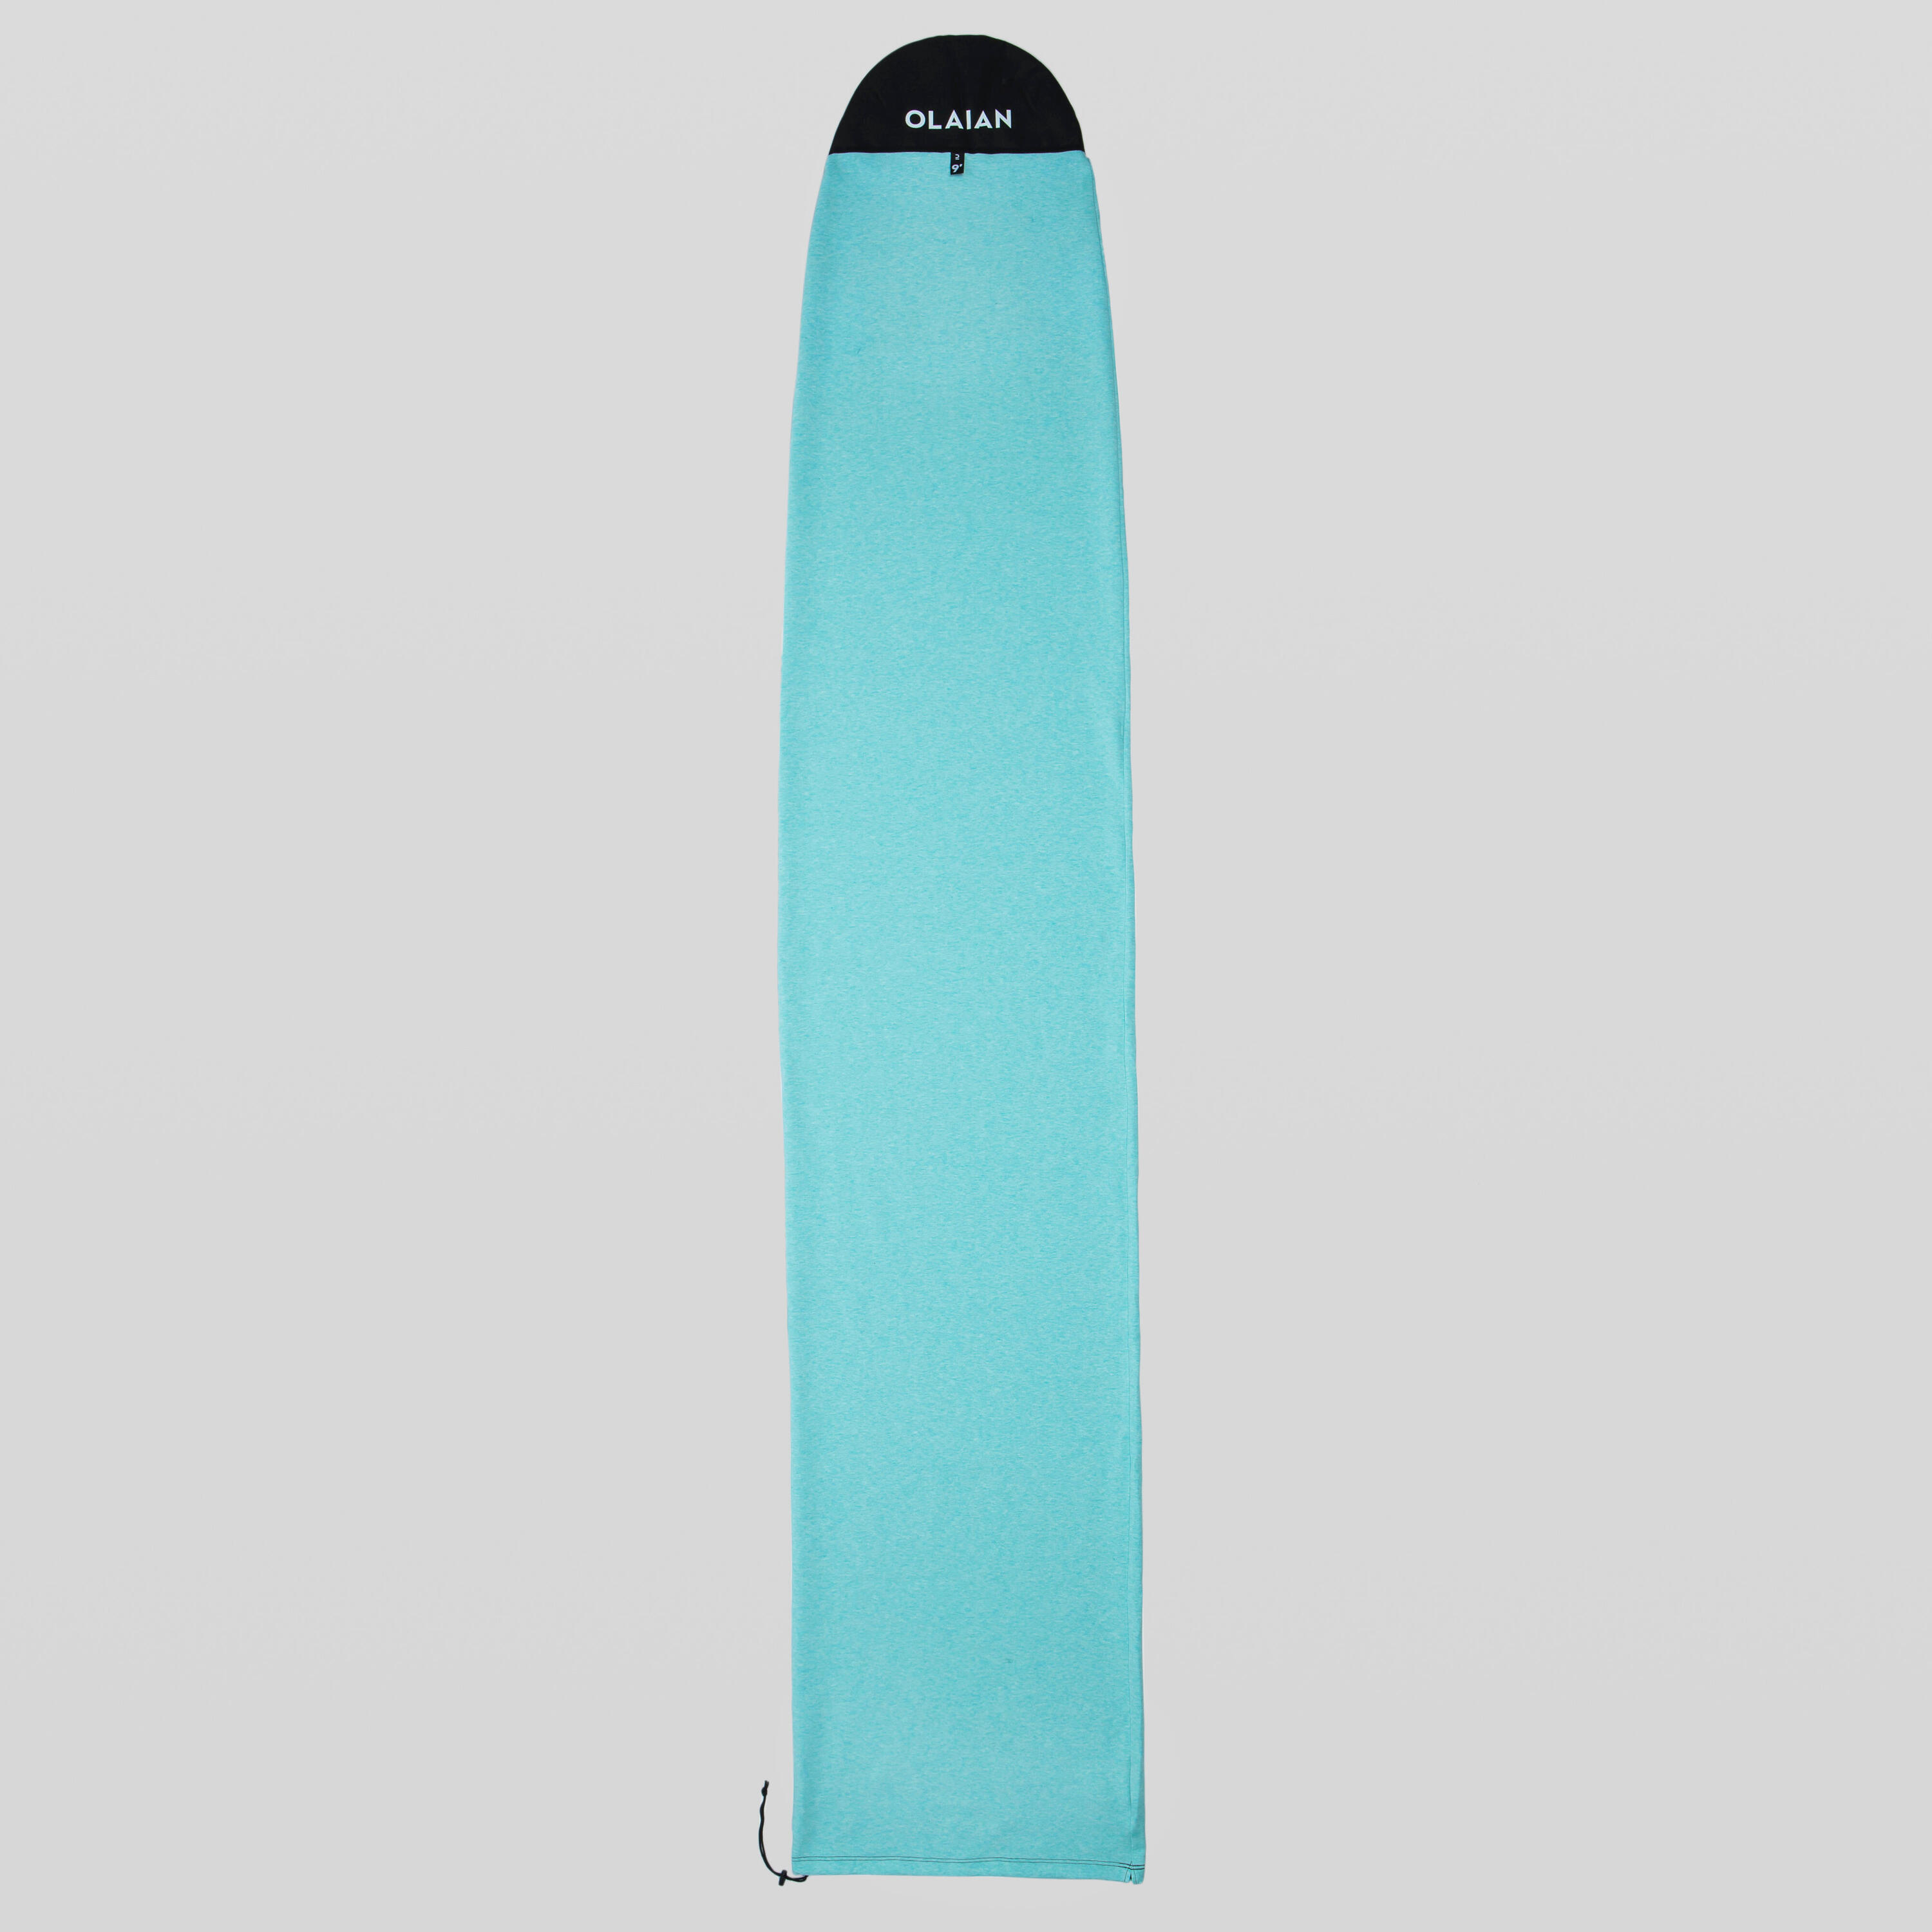 OLAIAN SURFING SOCK COVER for boards up to 9'2” max.